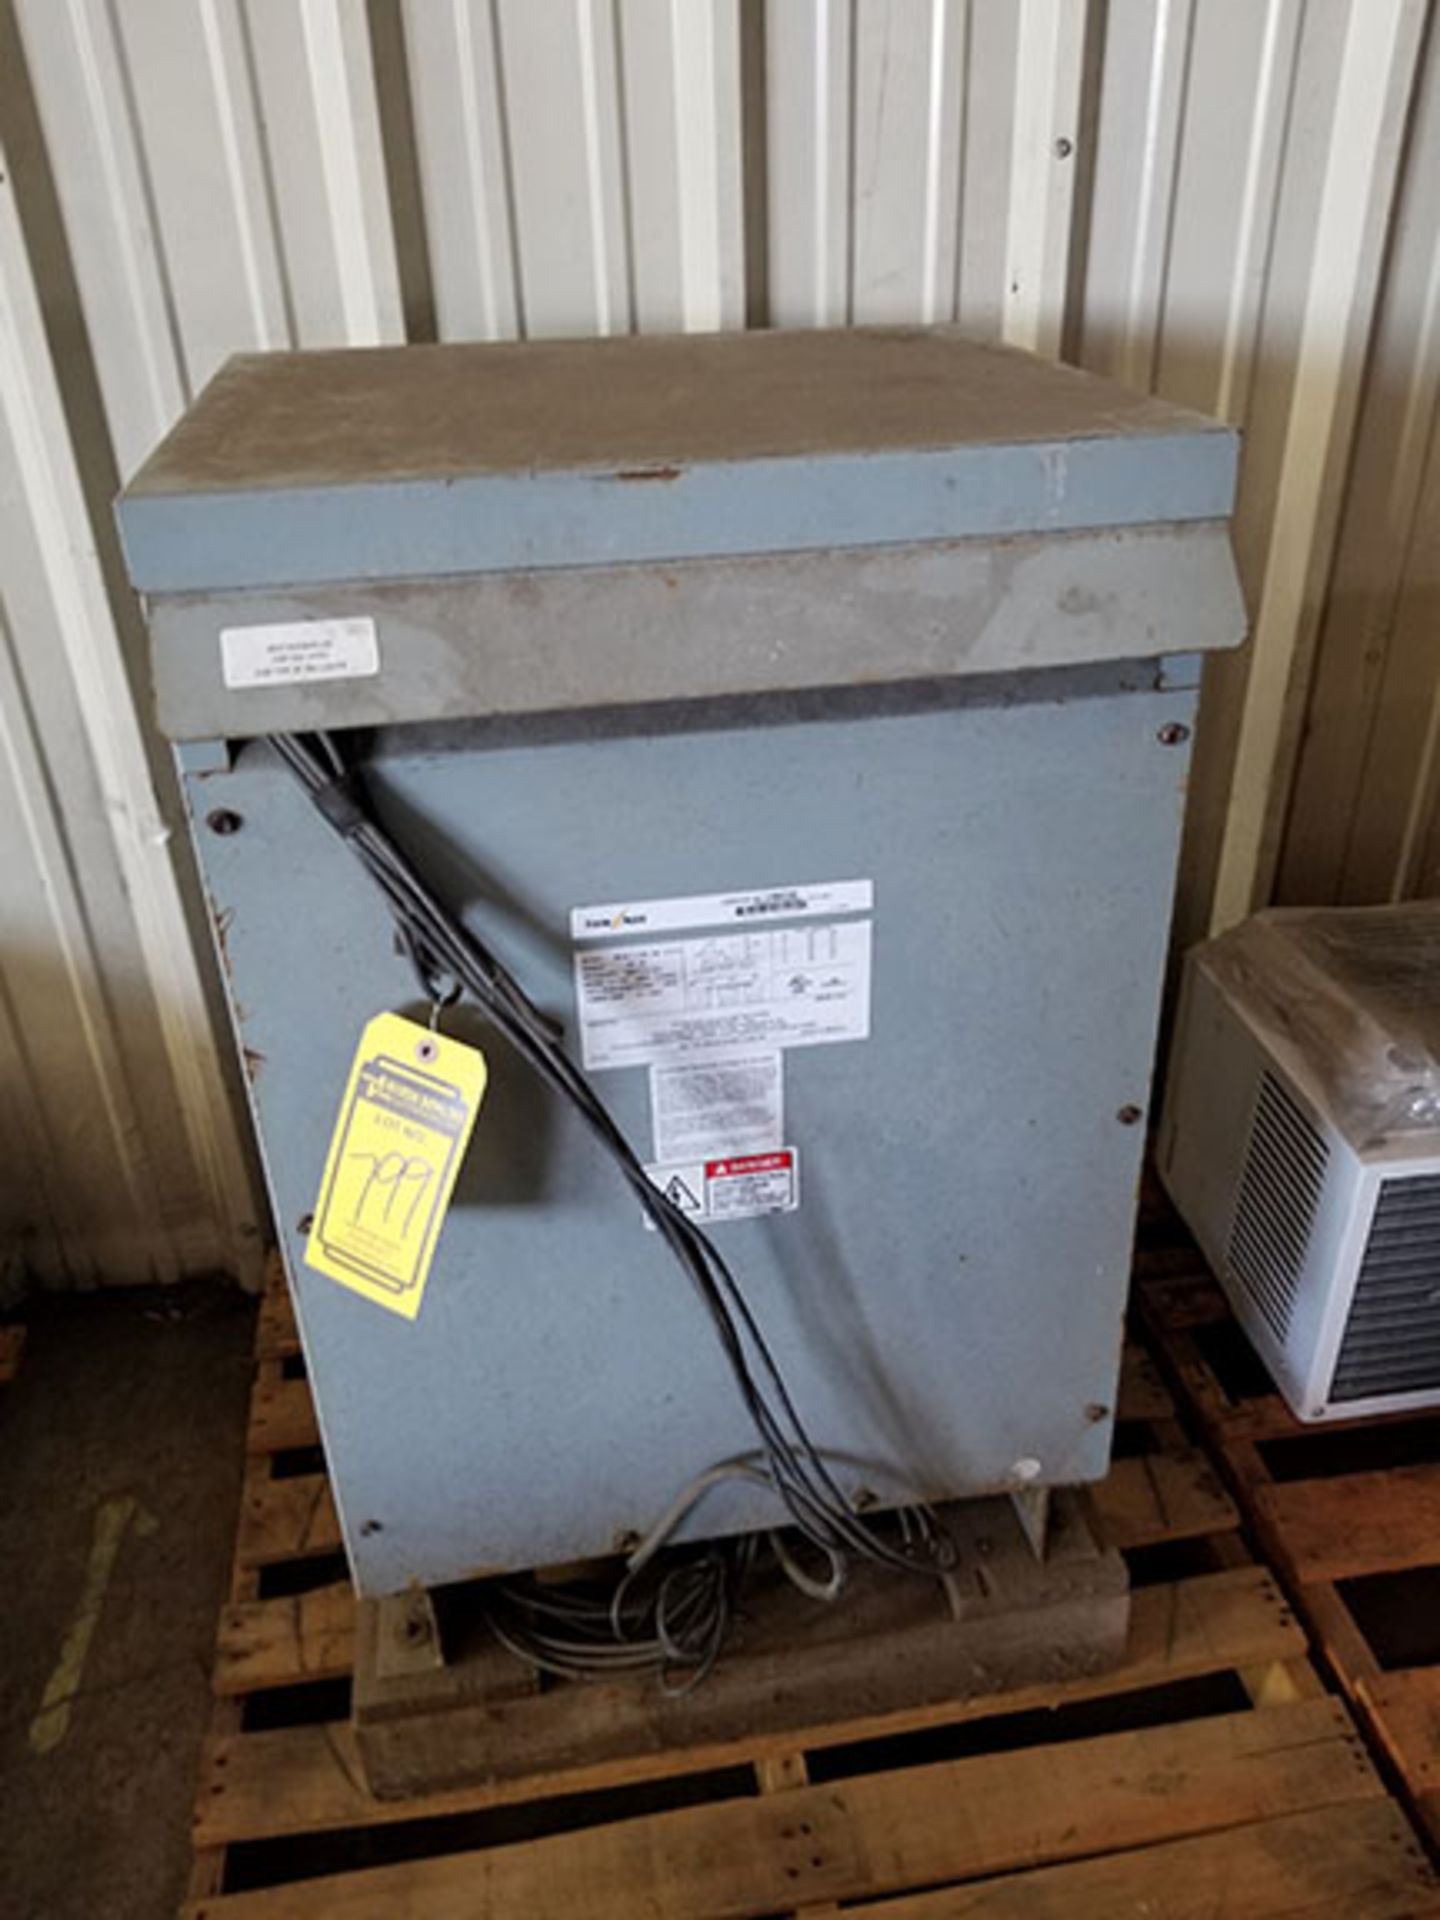 FEDERAL PACIFIC 30KVA DRY TYPE TRANSFORMER, 3 PHASE, 60HZ, MODEL 36B - Image 2 of 4